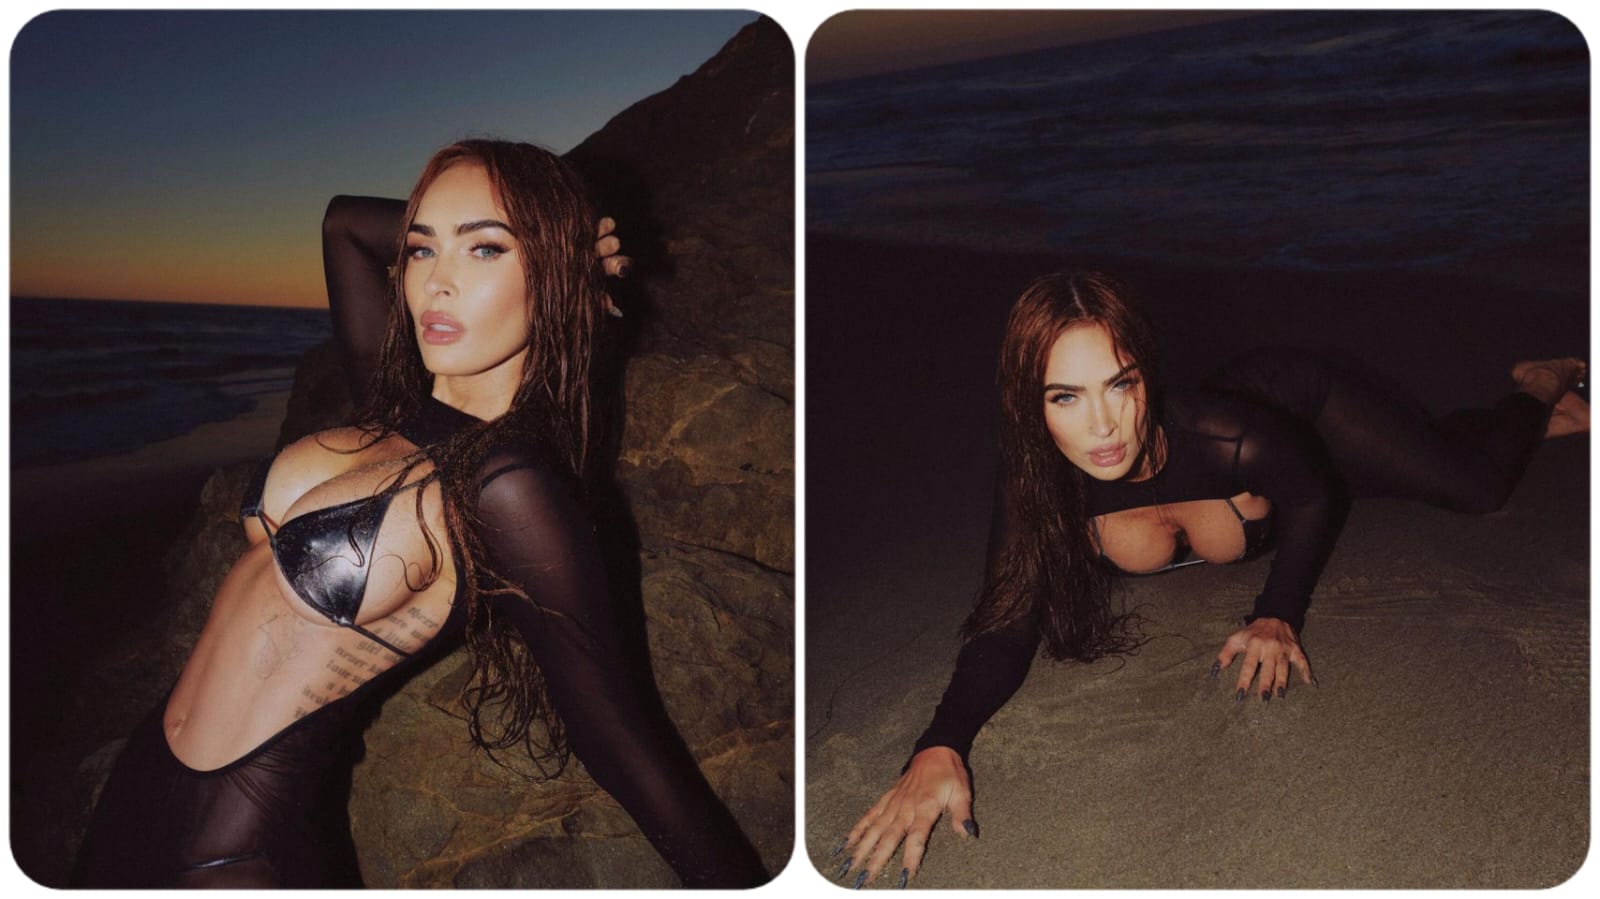 Seductive Megan Fox poses on the beach laying on the sand